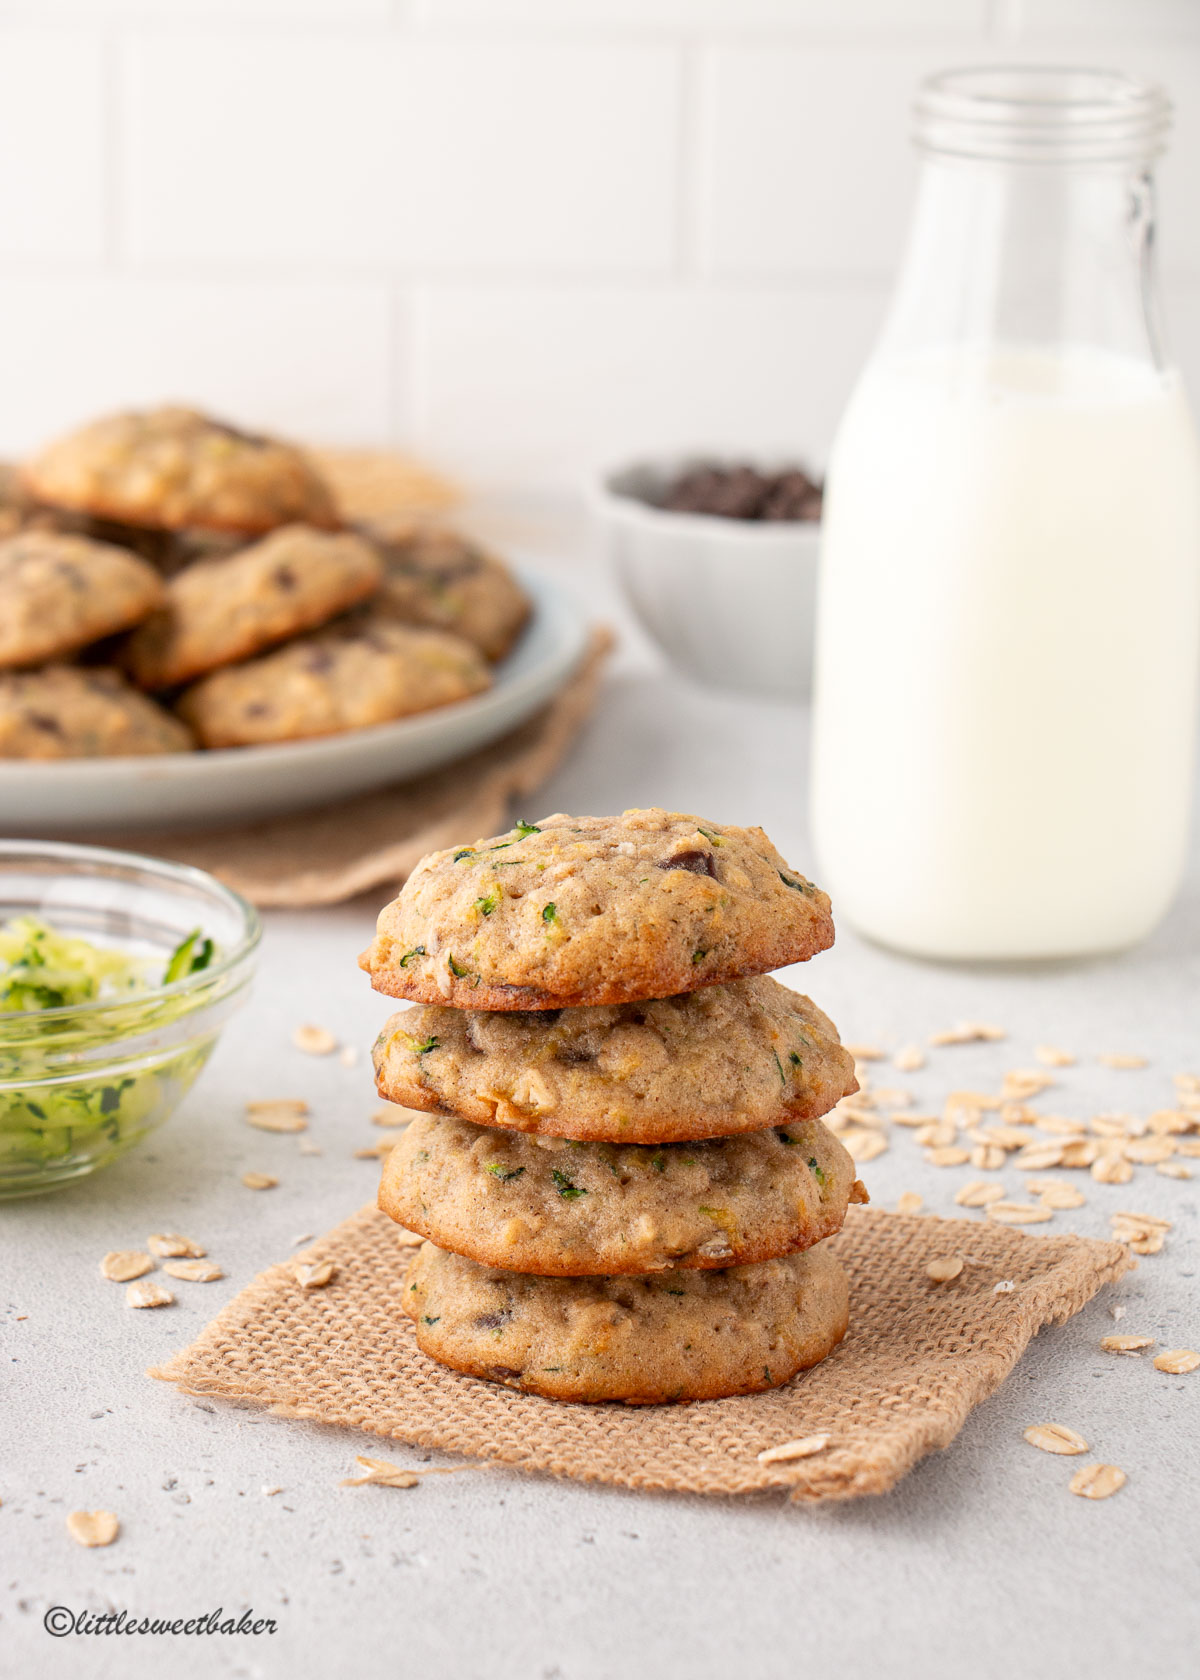 A stack of zucchini oatmeal cookies with a glass of milk and plate of cookies in the background.